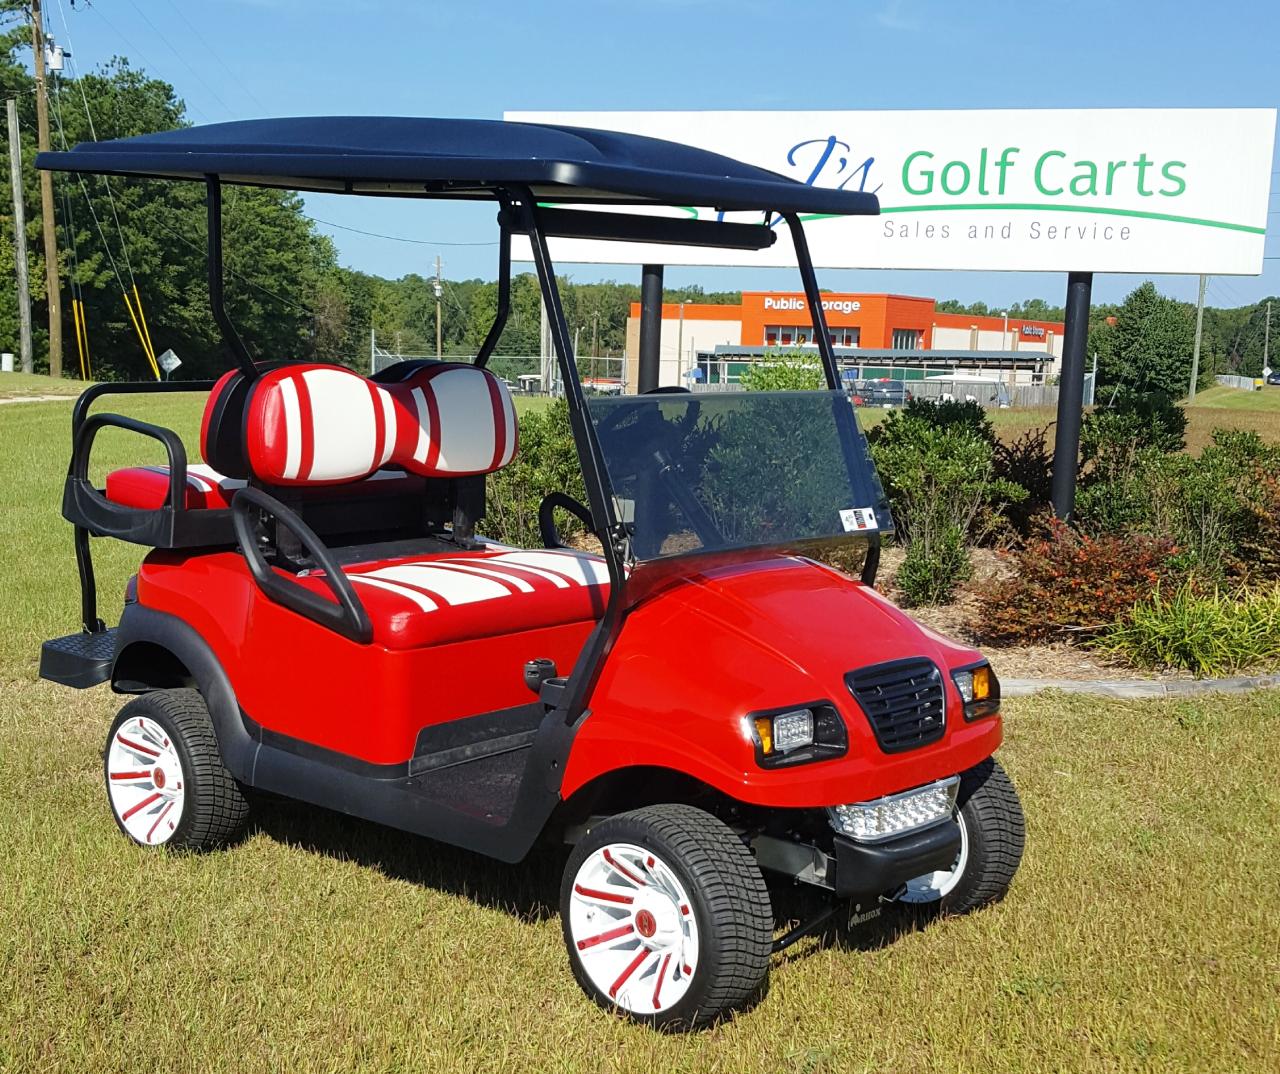 Used Golf Carts for Sale by Owner in Lexington, Virginia: Find Your Perfect Ride